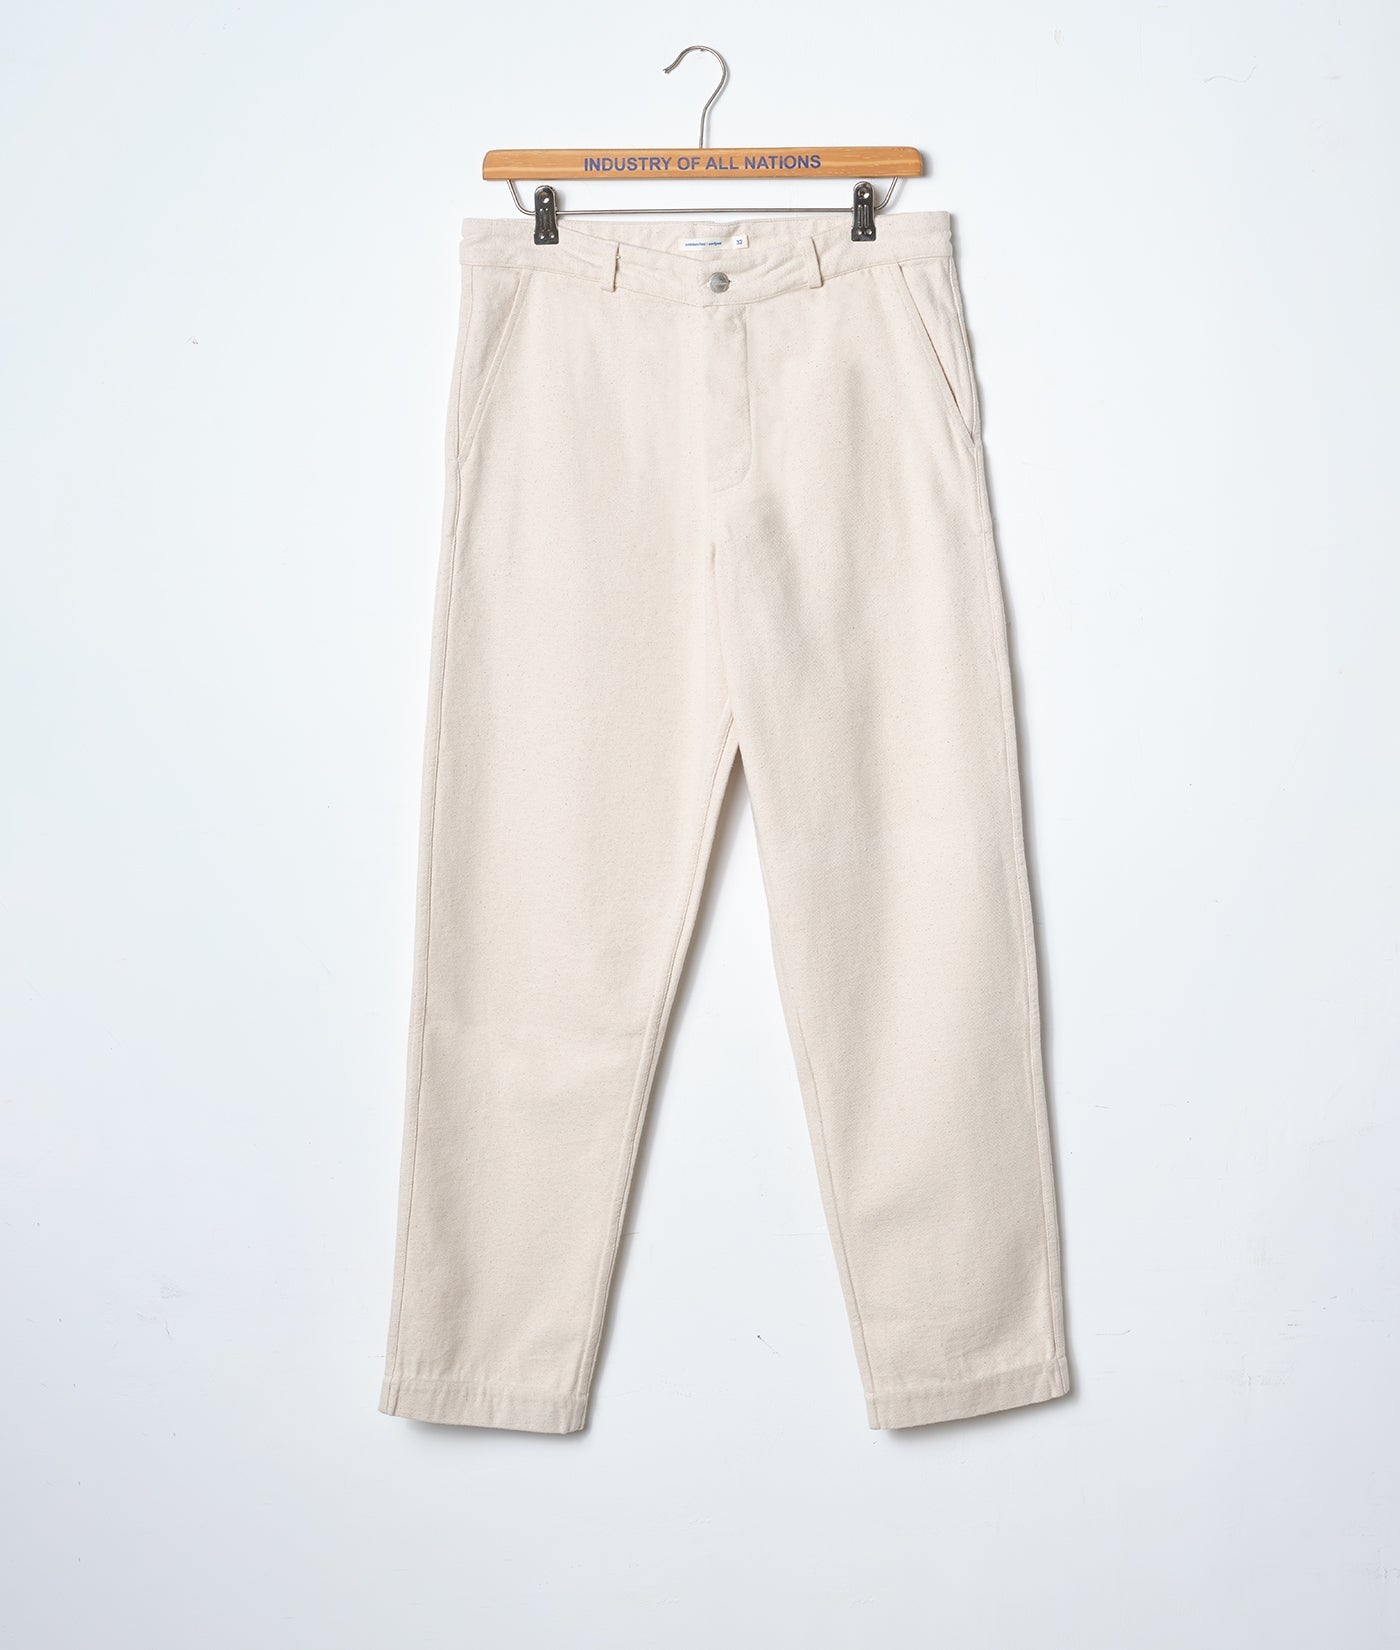 Industry of All Nations Clean Carpenter Pants, Undyed